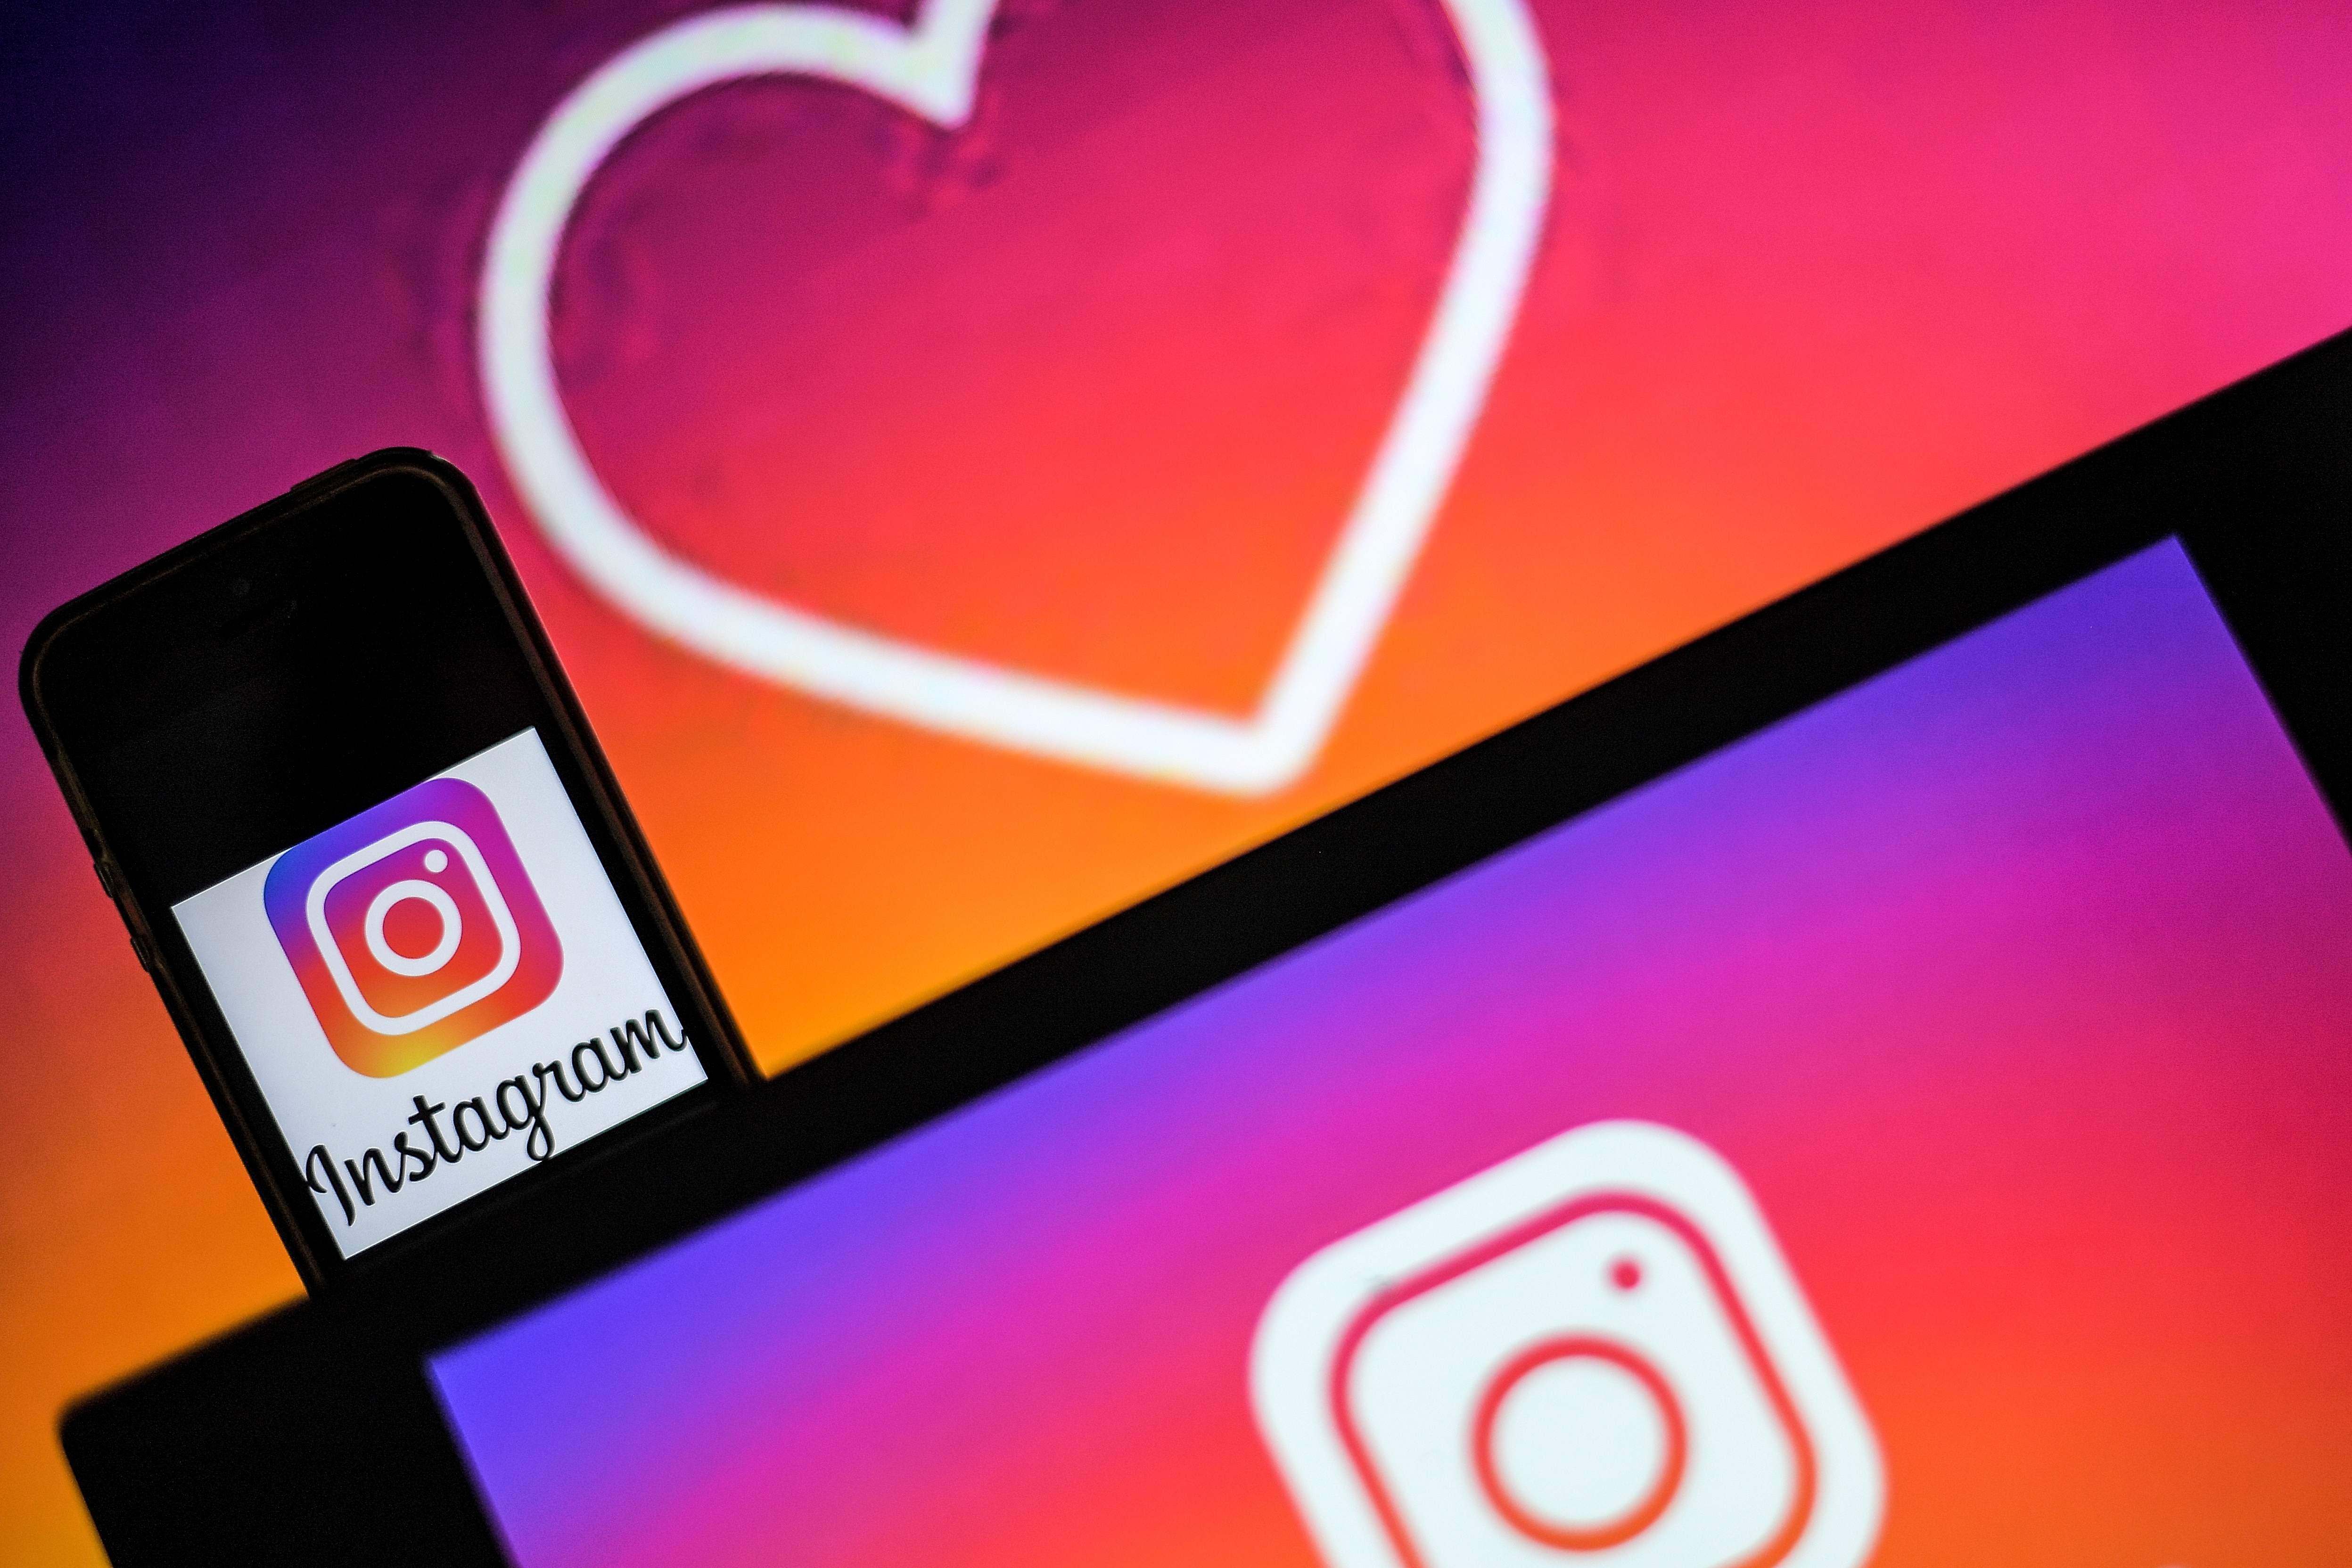 Logos of US social network Instagram are displayed on the screen of a computer and a smartphone, on May 2, 2019 in Nantes, western France. (Photo by LOIC VENANCE / AFP)